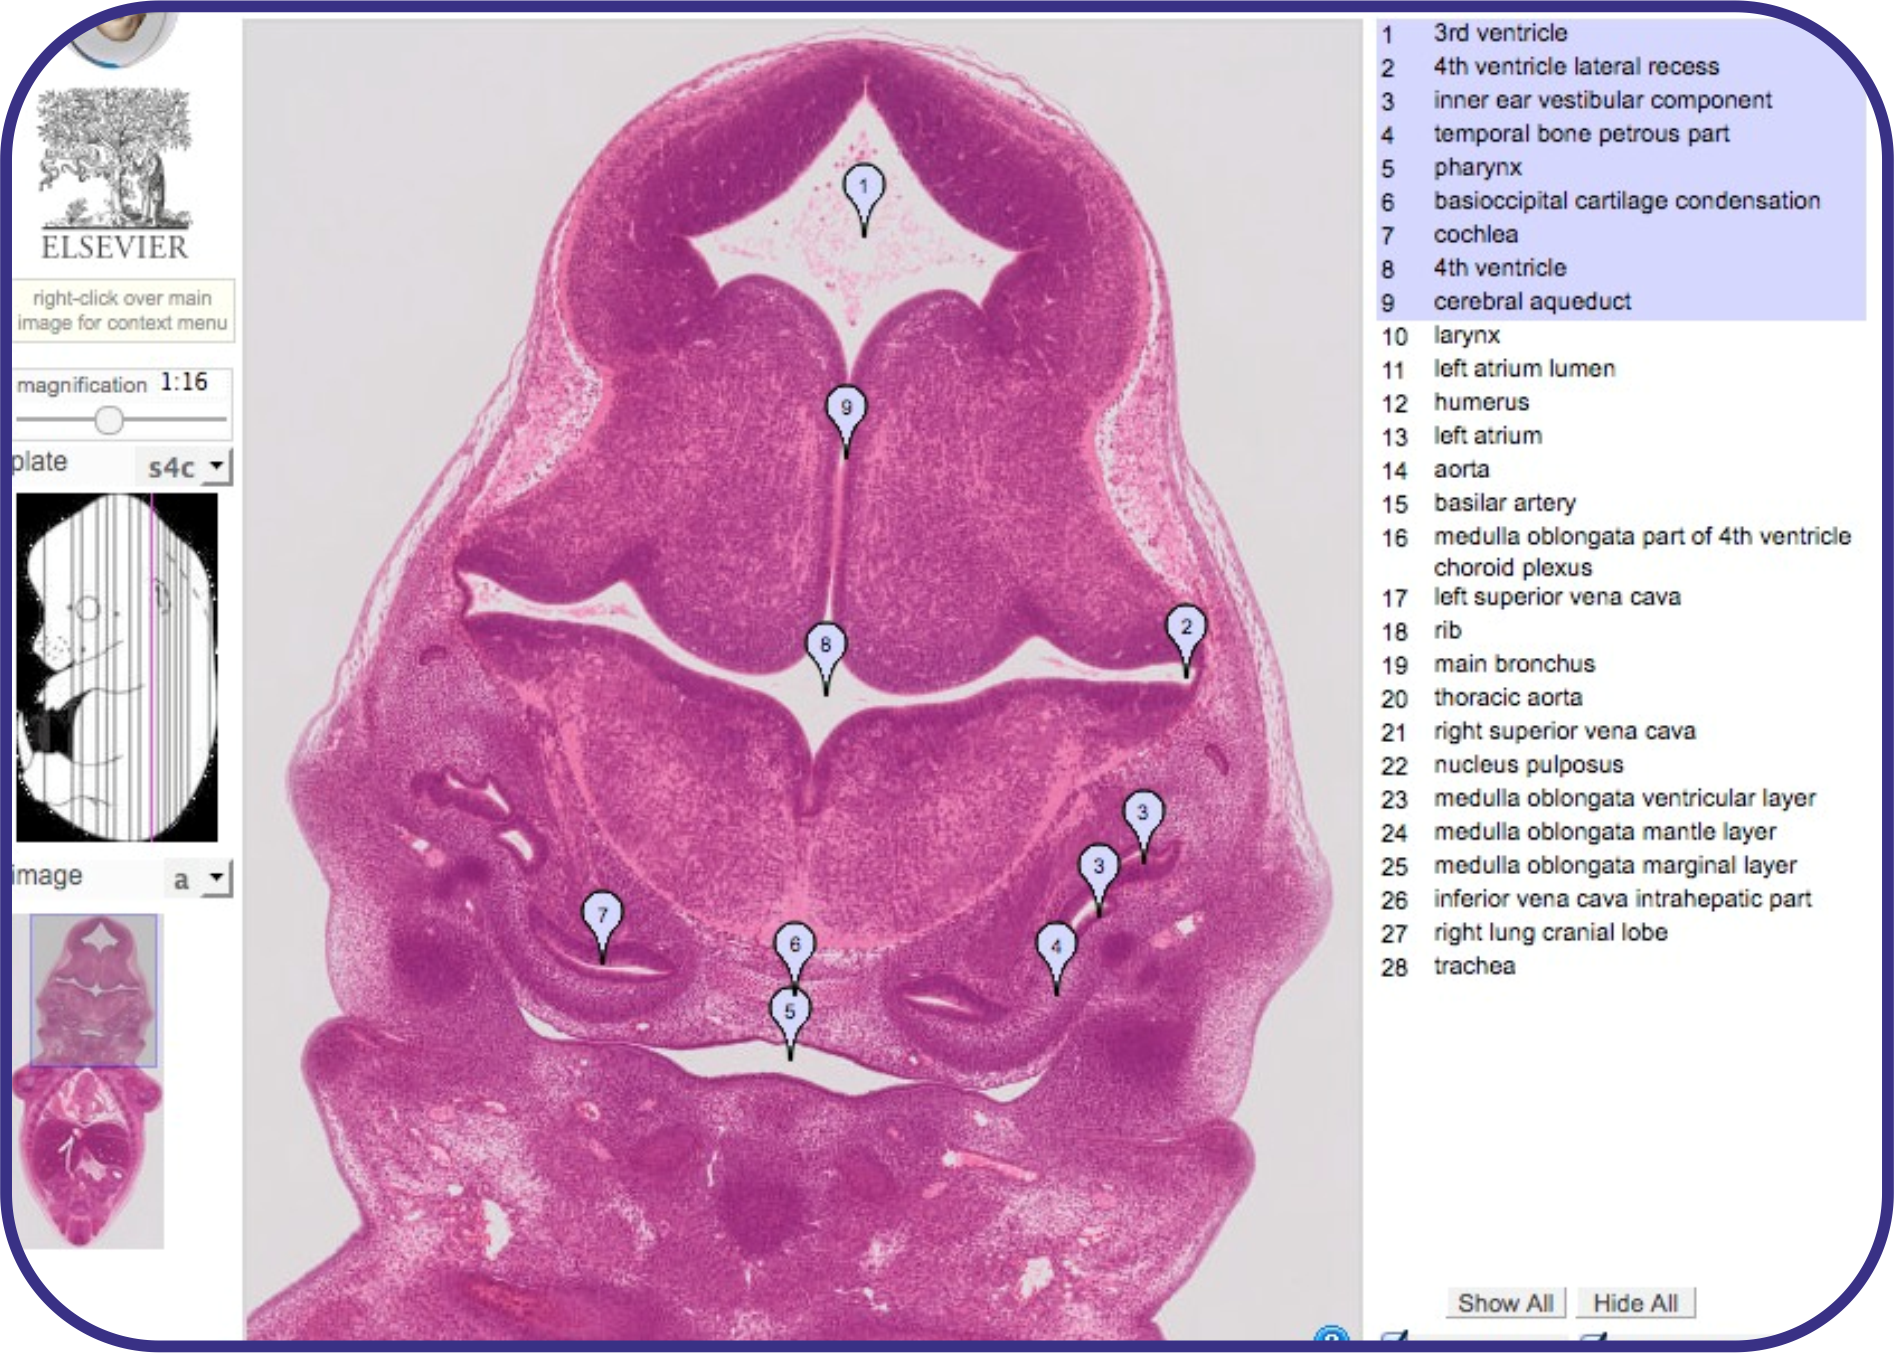 Ehistology view of the TS22 Coronal section from the Kaufman atlas supplement